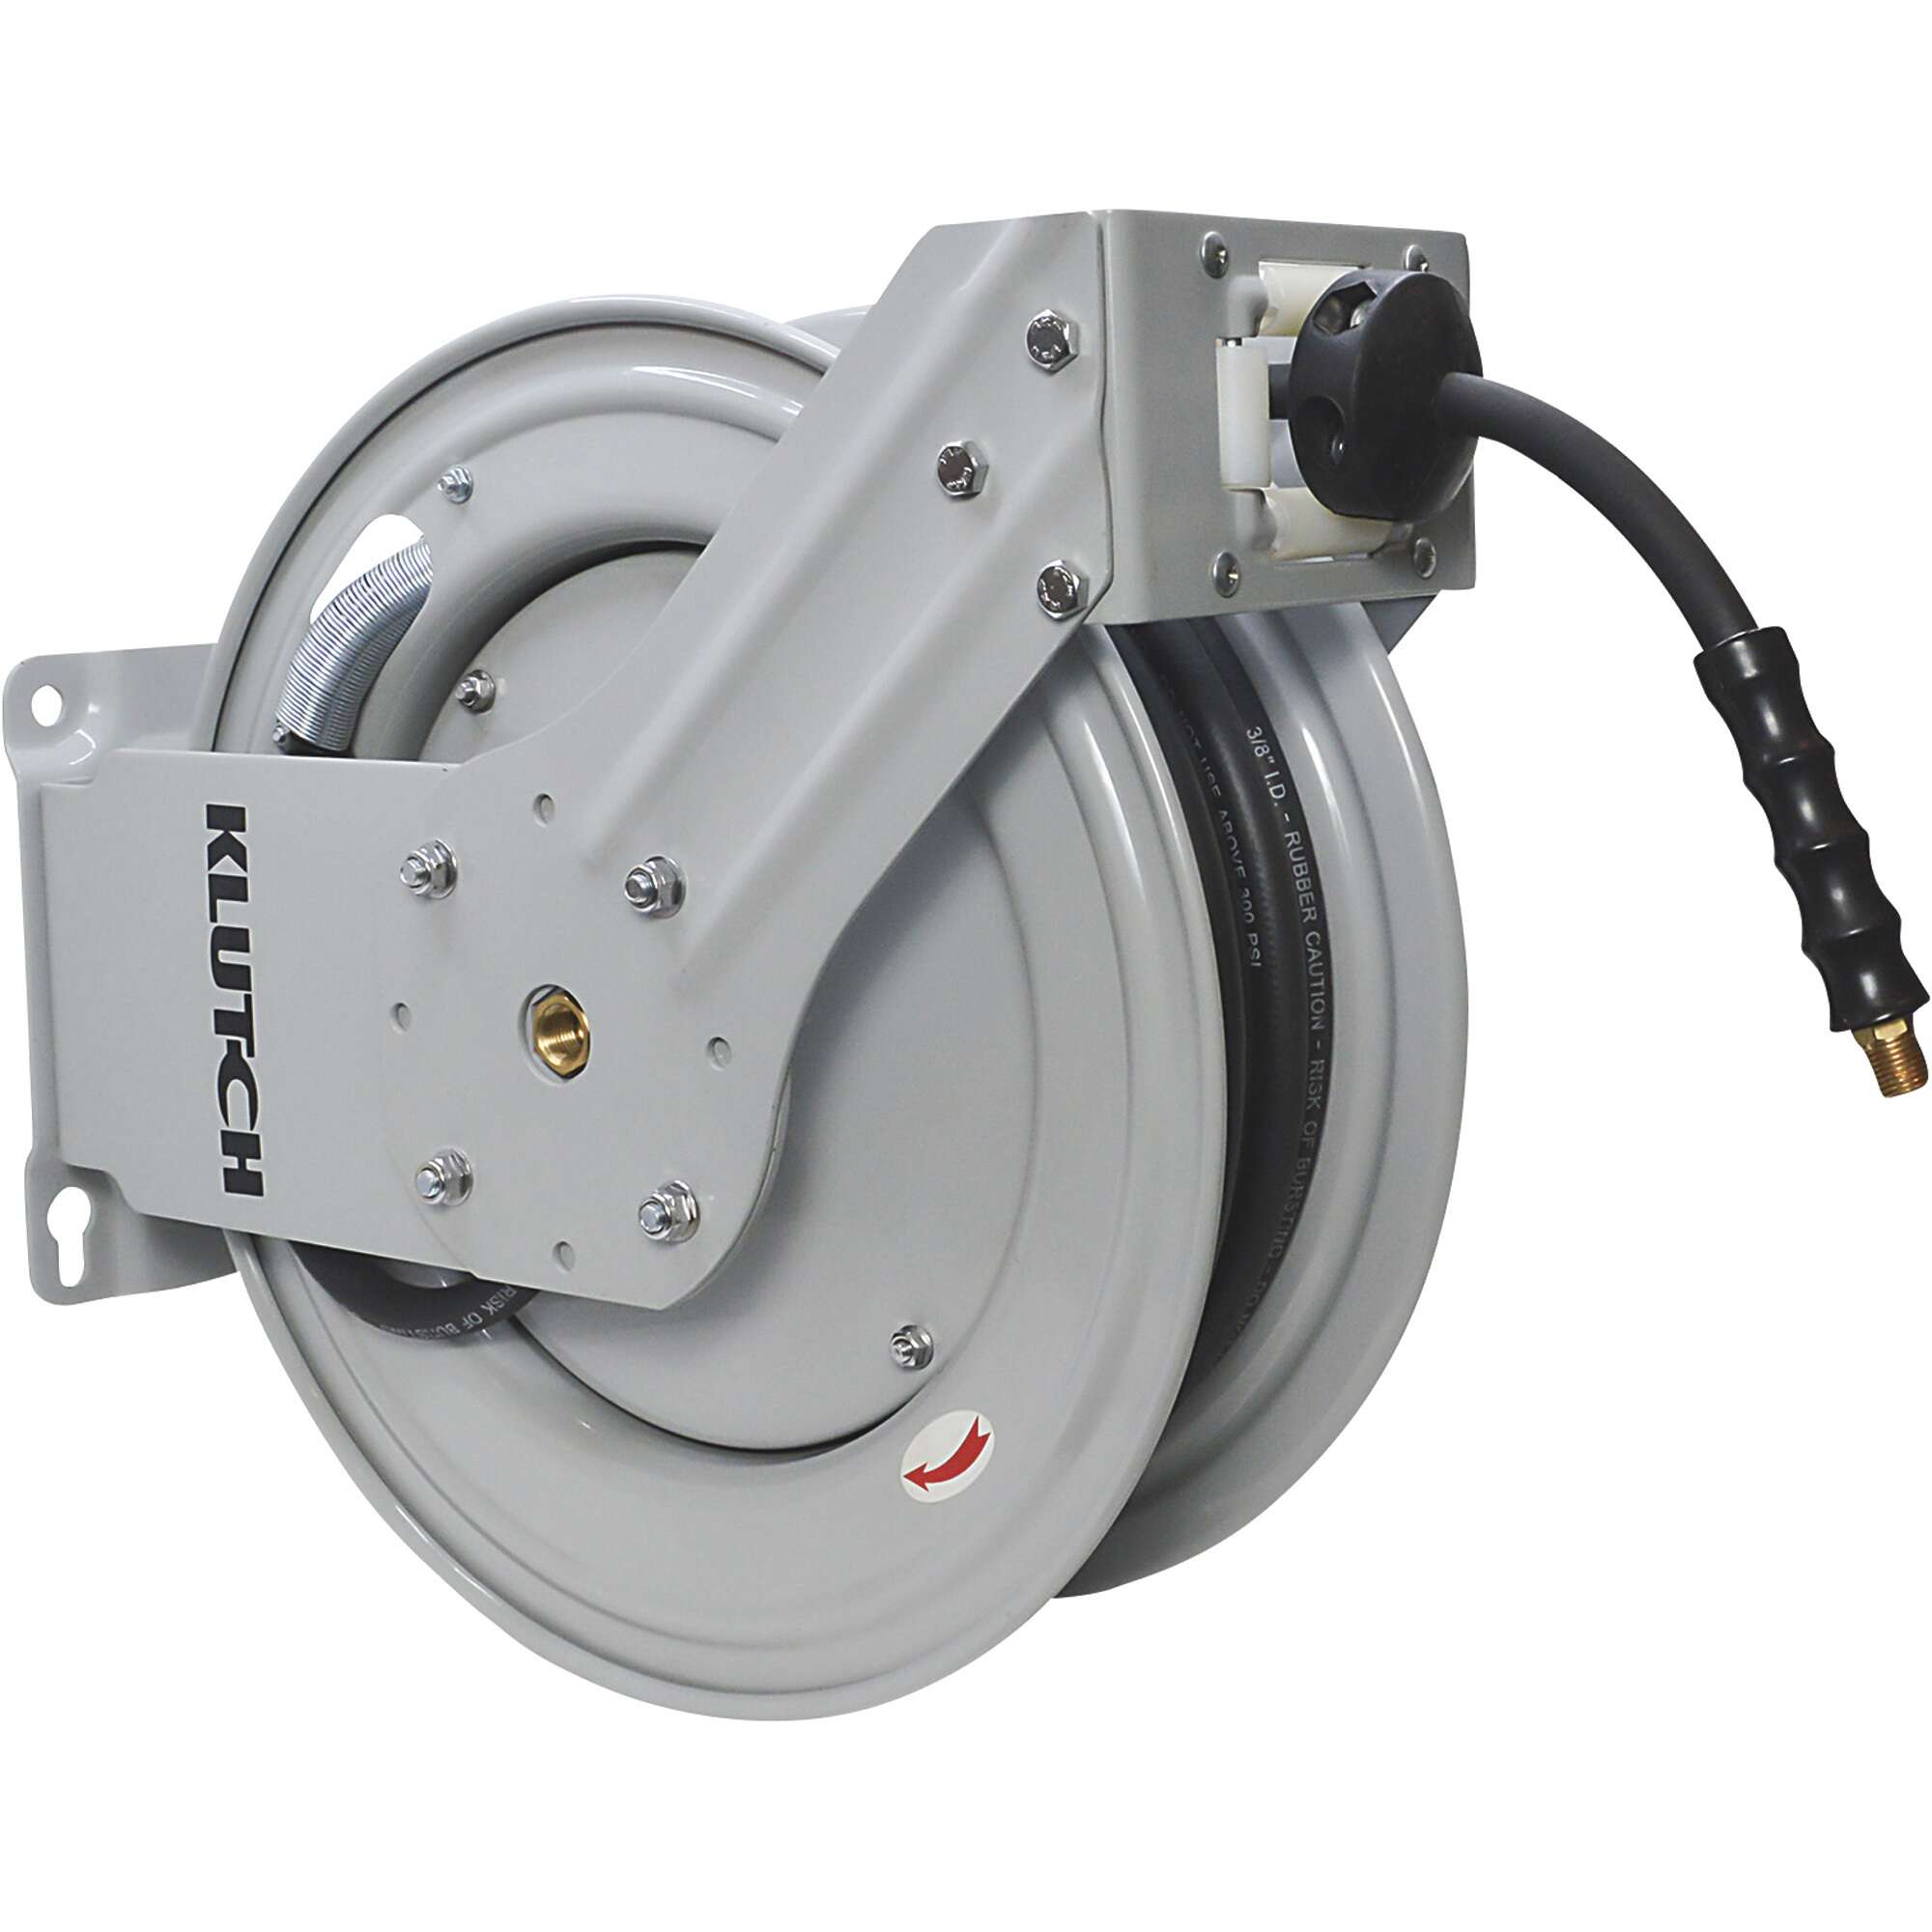 Klutch Auto Rewind Air Hose Reel With 3/8in x 50ft NBR Rubber Hose Dual ...